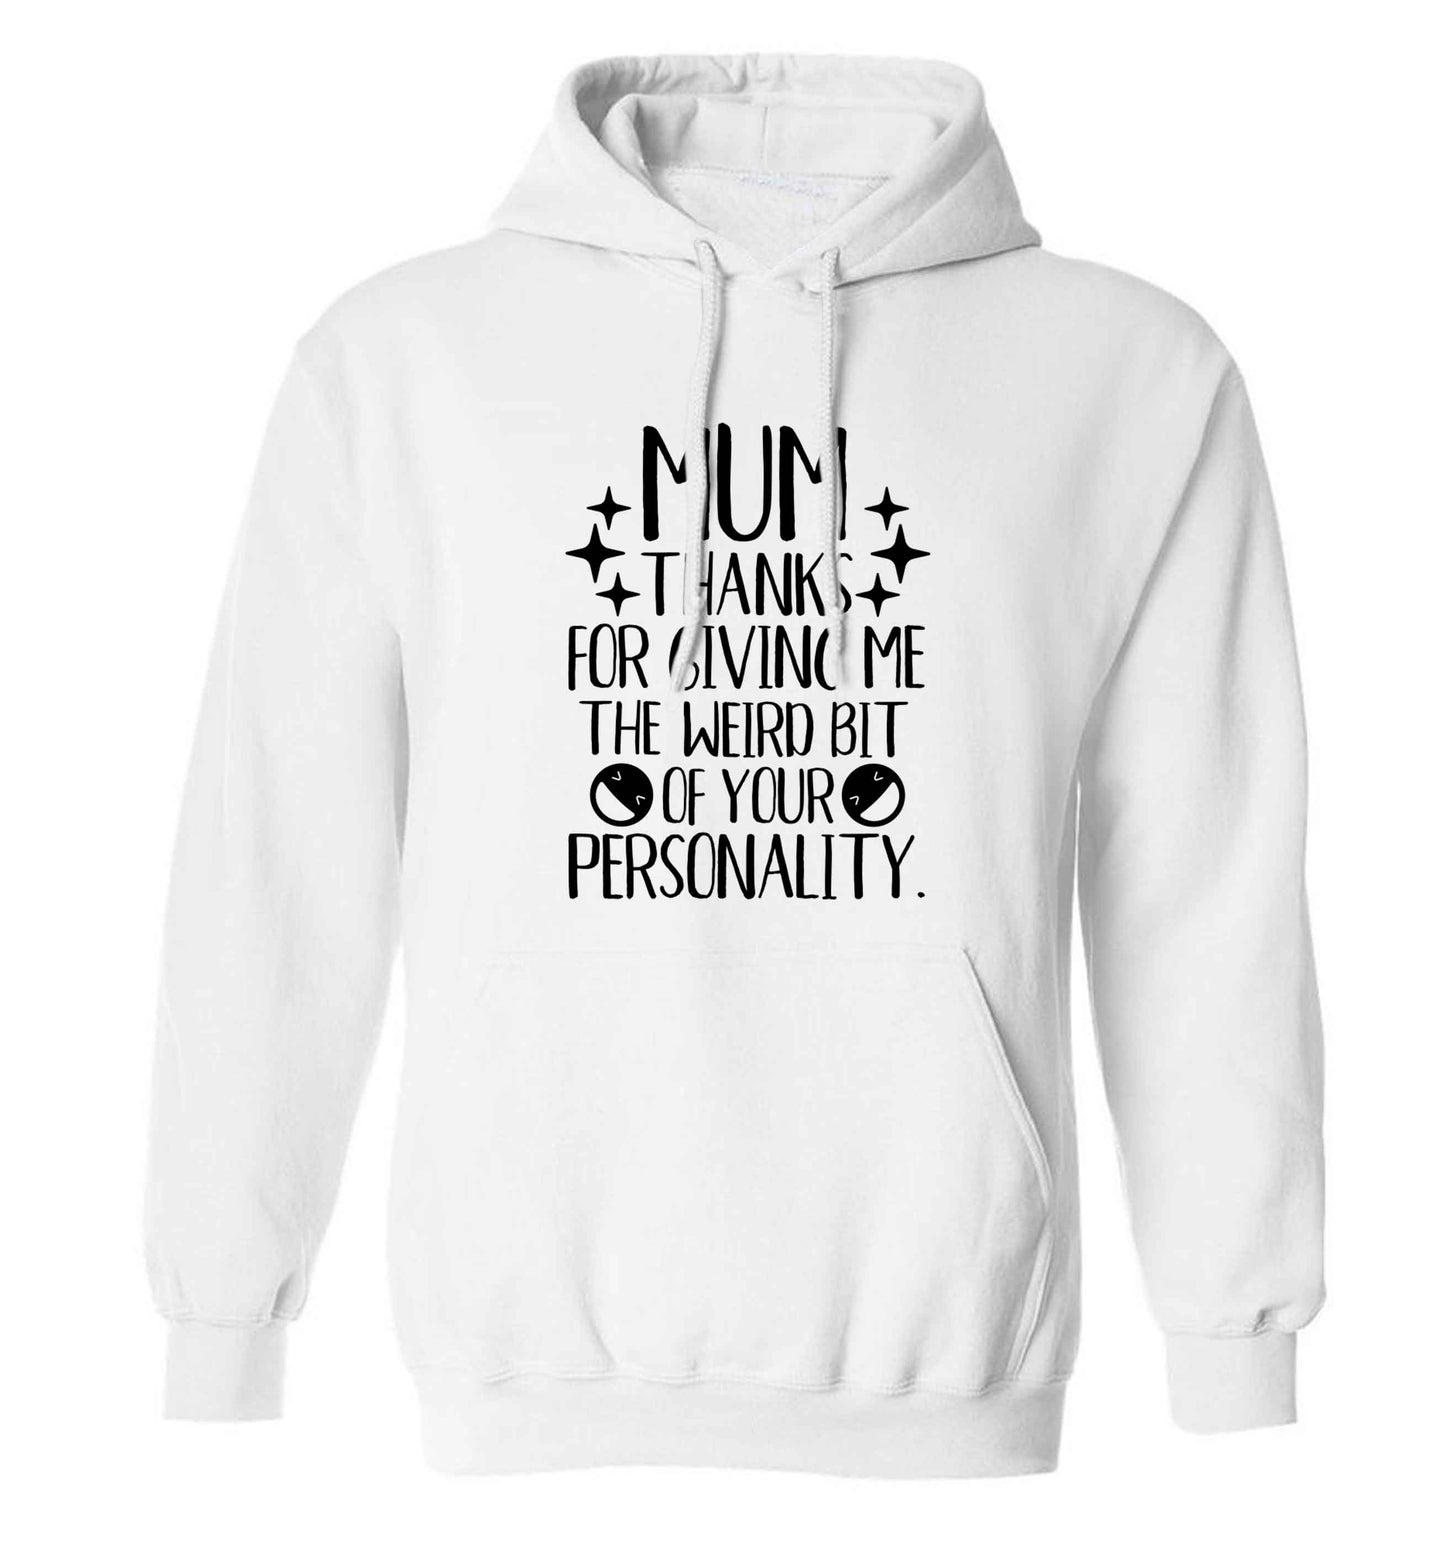 Mum, I love you more than halloumi and if you know me at all you know how deep that is adults unisex white hoodie 2XL